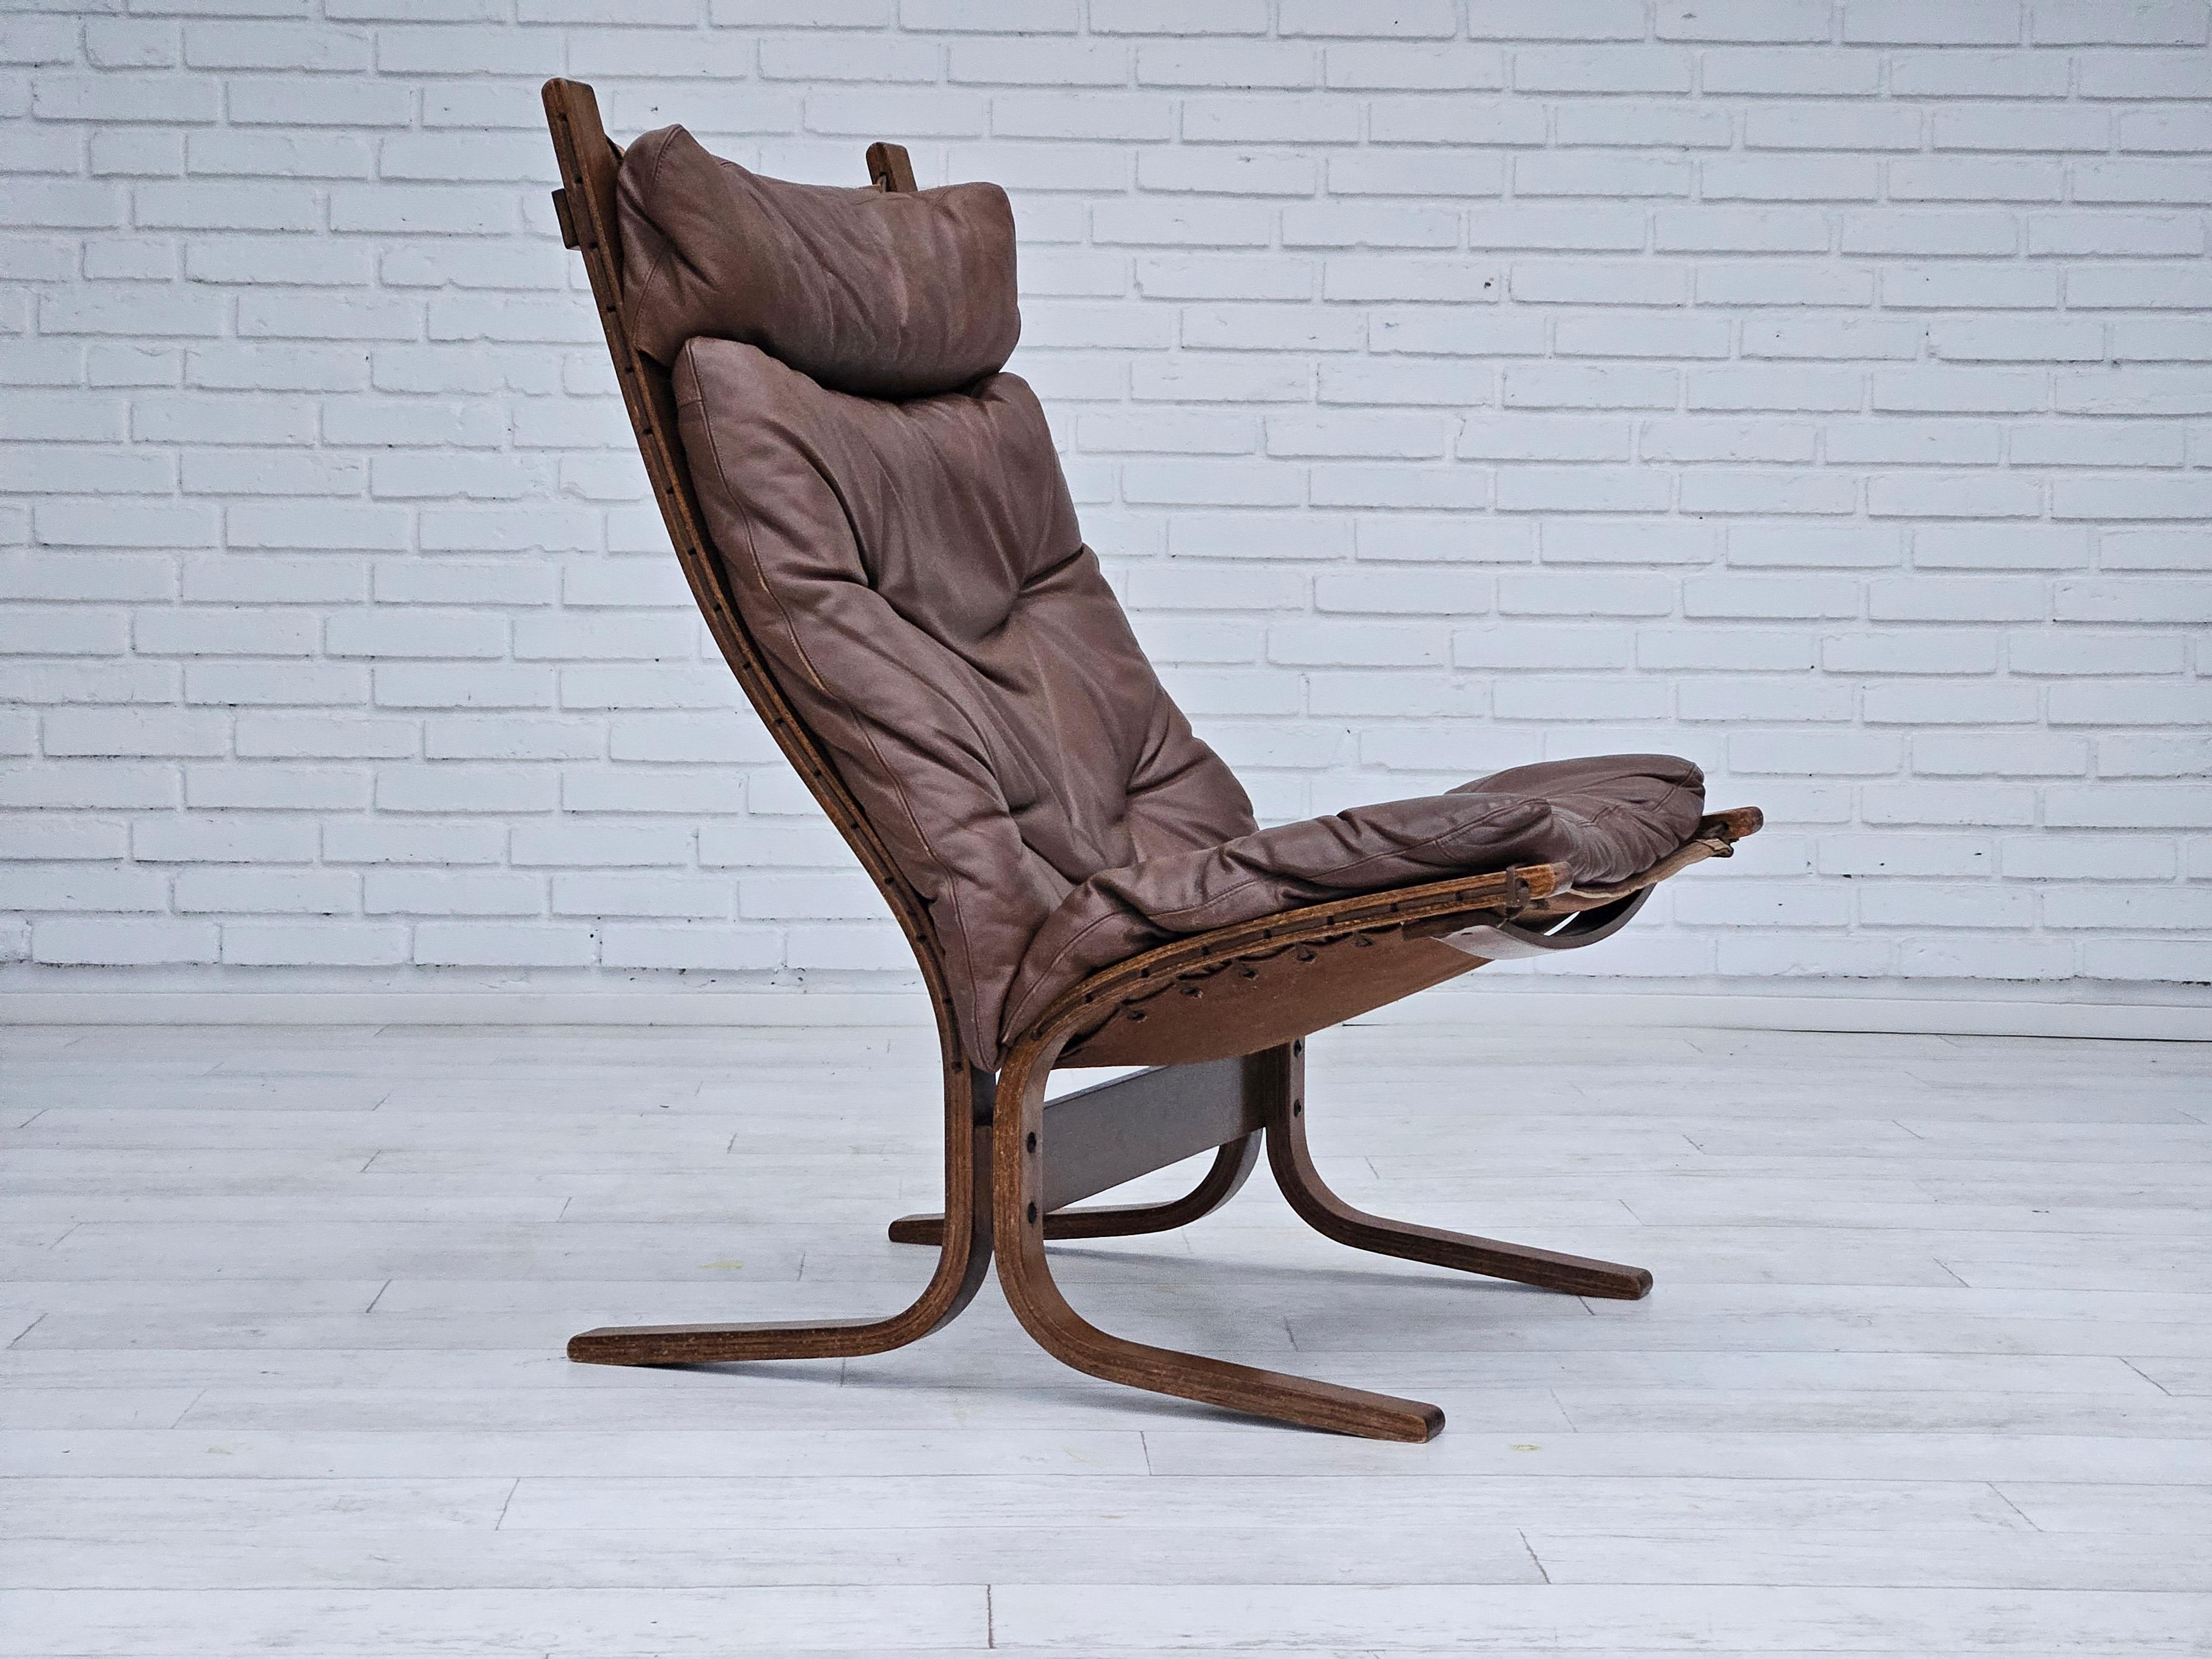 1970s, Norwegian design, relax chair model 'Siesta' by Ingmar Relling for Westnofa. Original good condition. No smells and no stains. Brown leather, canvas, and bent wood. 